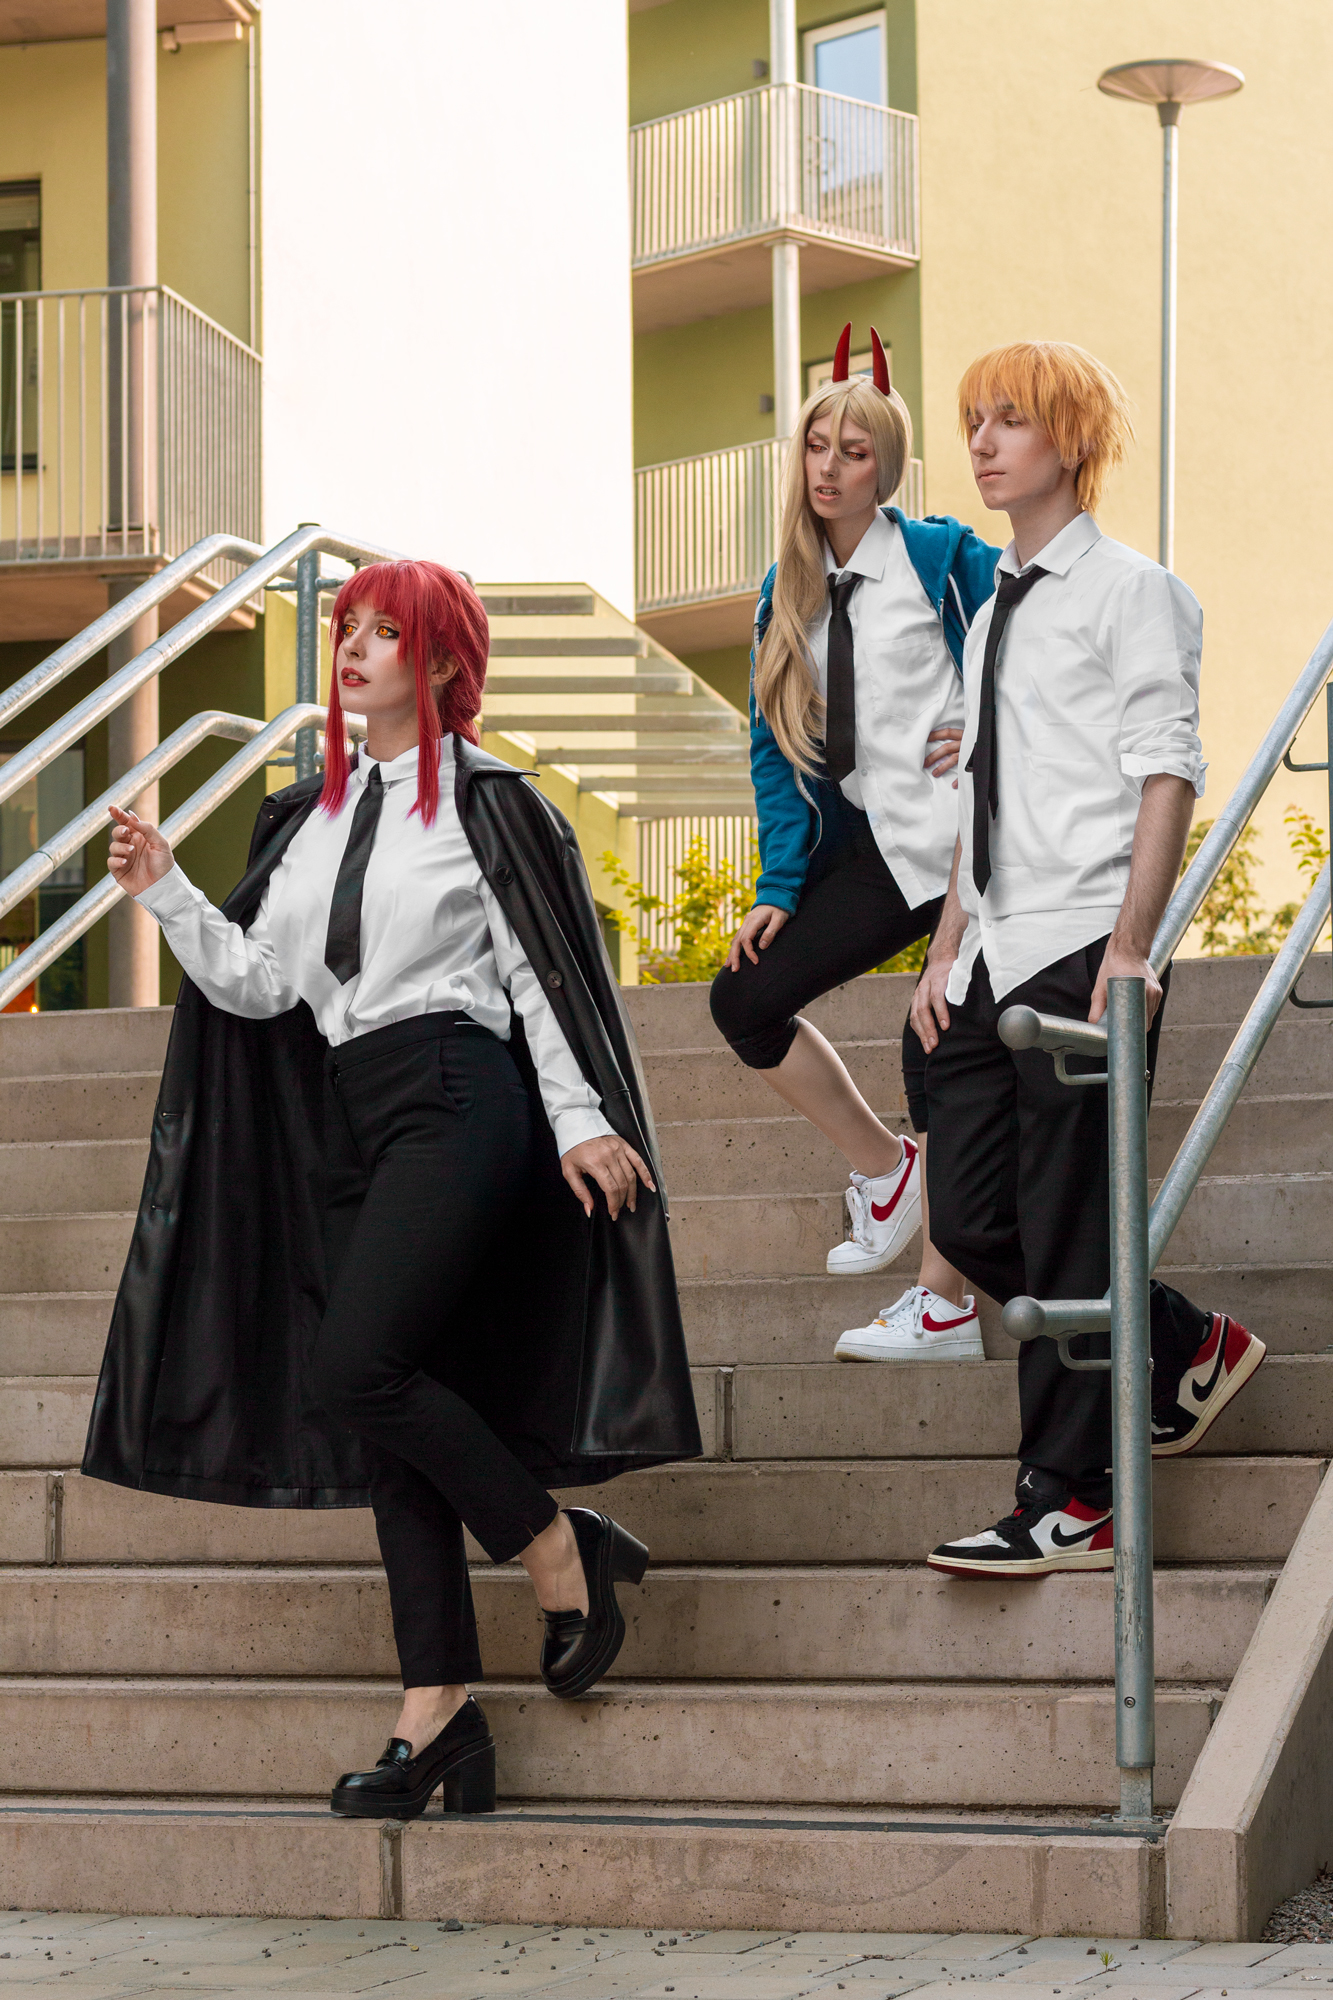 Chainsaw man cosplay group by Andivicosplay on DeviantArt